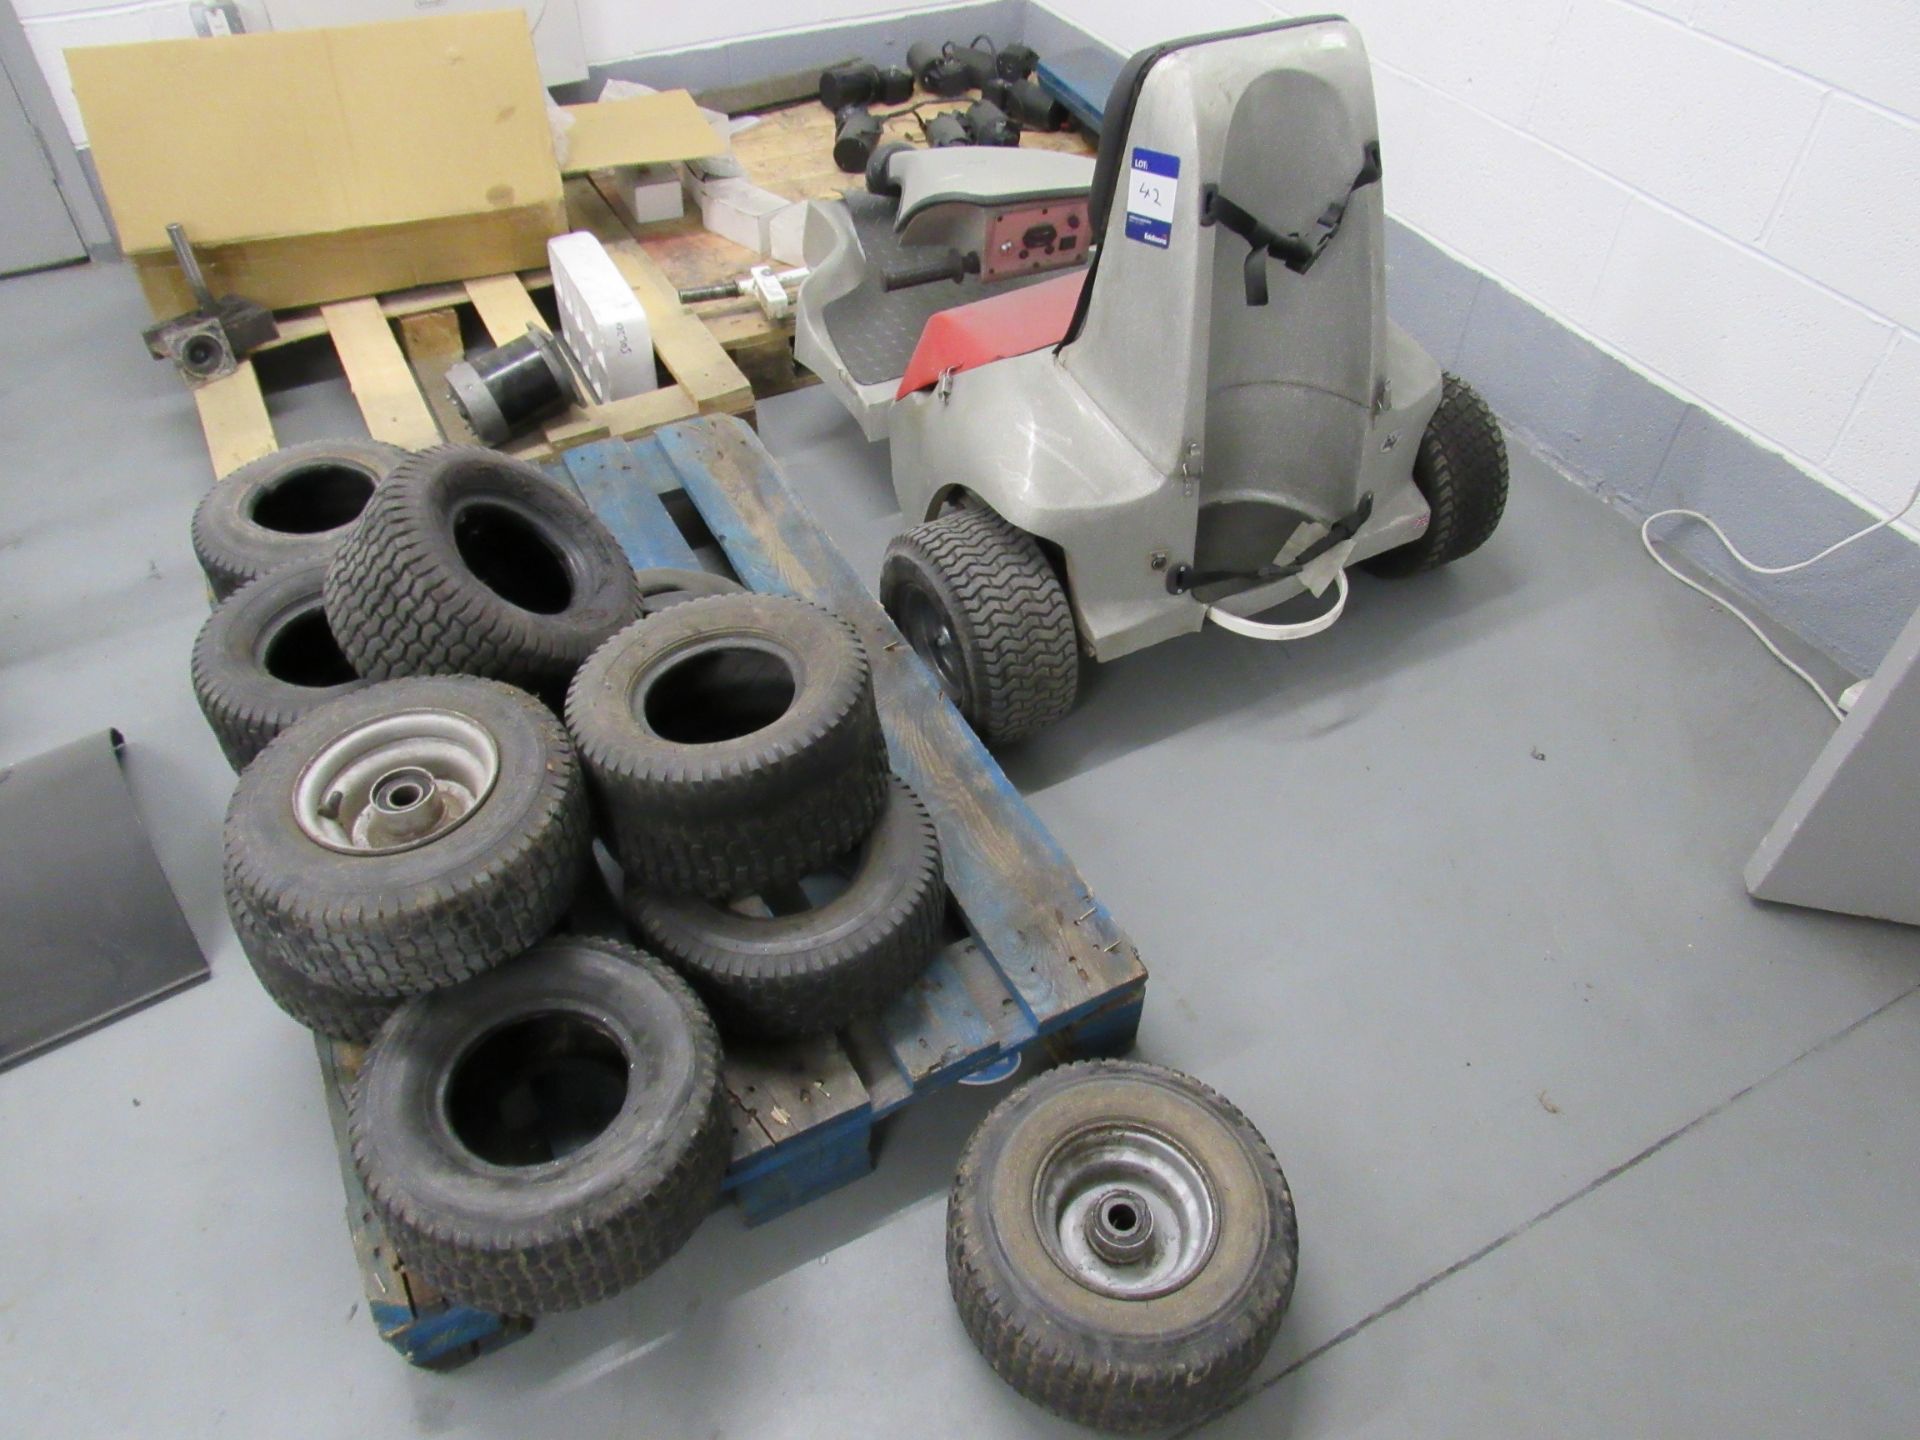 Quantity of wheels and decommissioned golf buggy - Image 2 of 3